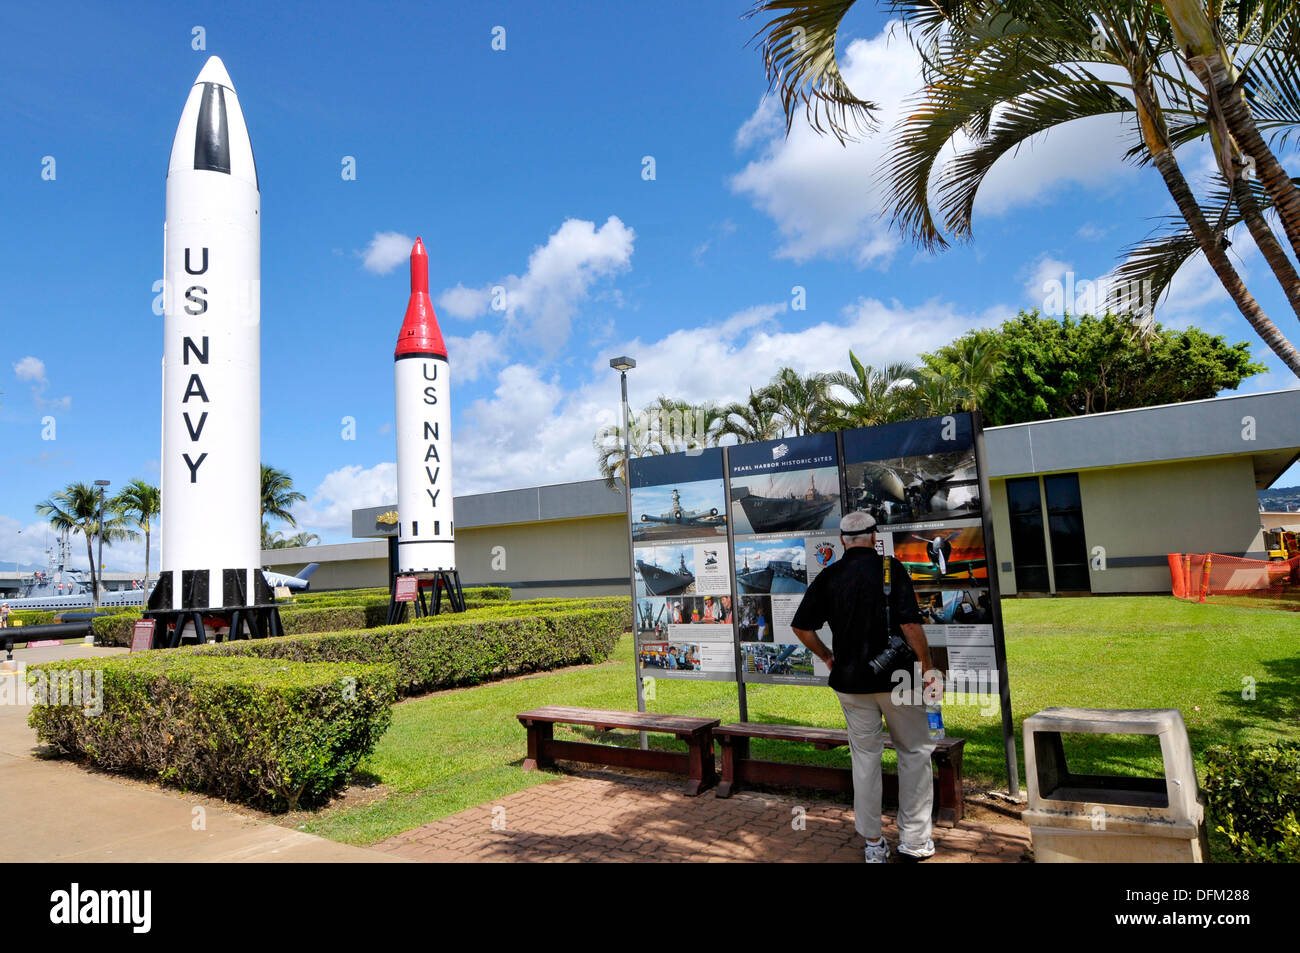 Polaris A1 Submarine Launched Ballistic Missile Pearl Harbor Hawaii Pacific National Monument Stock Photo